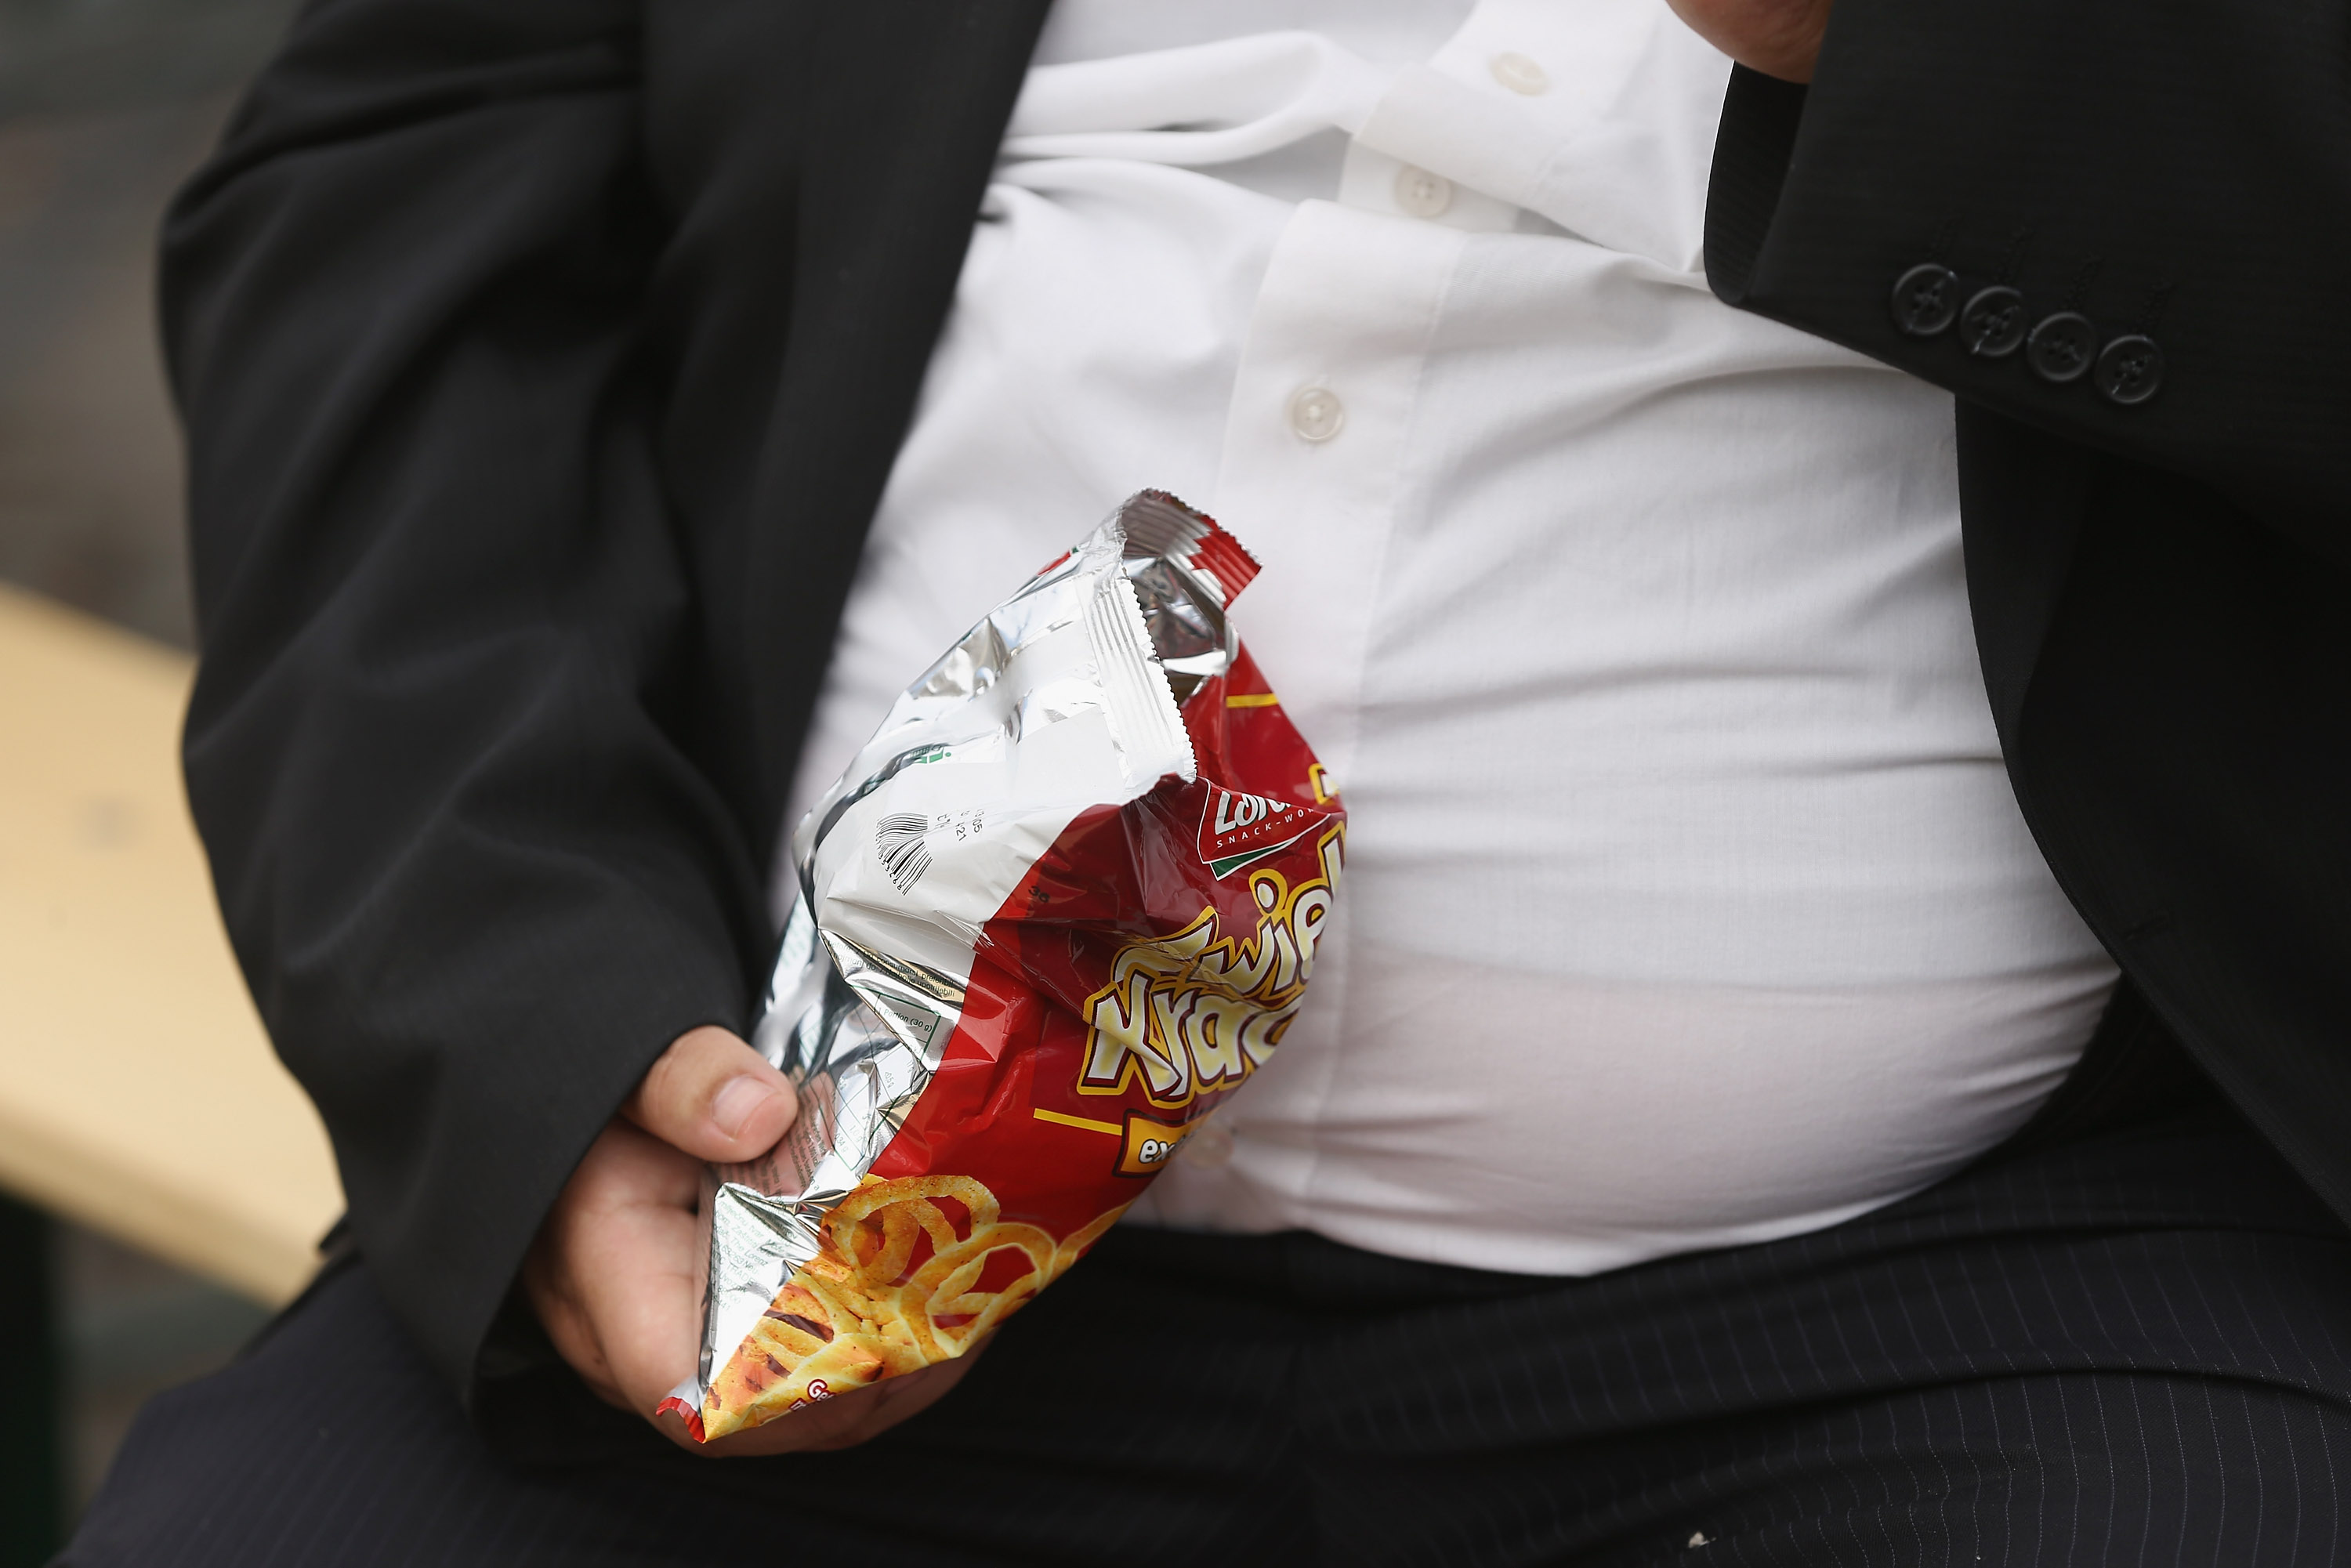 A man with a large belly eats junk food on May 23, 2013 in Leipzig, Germany. (Photo by Sean Gallup/Getty Images)